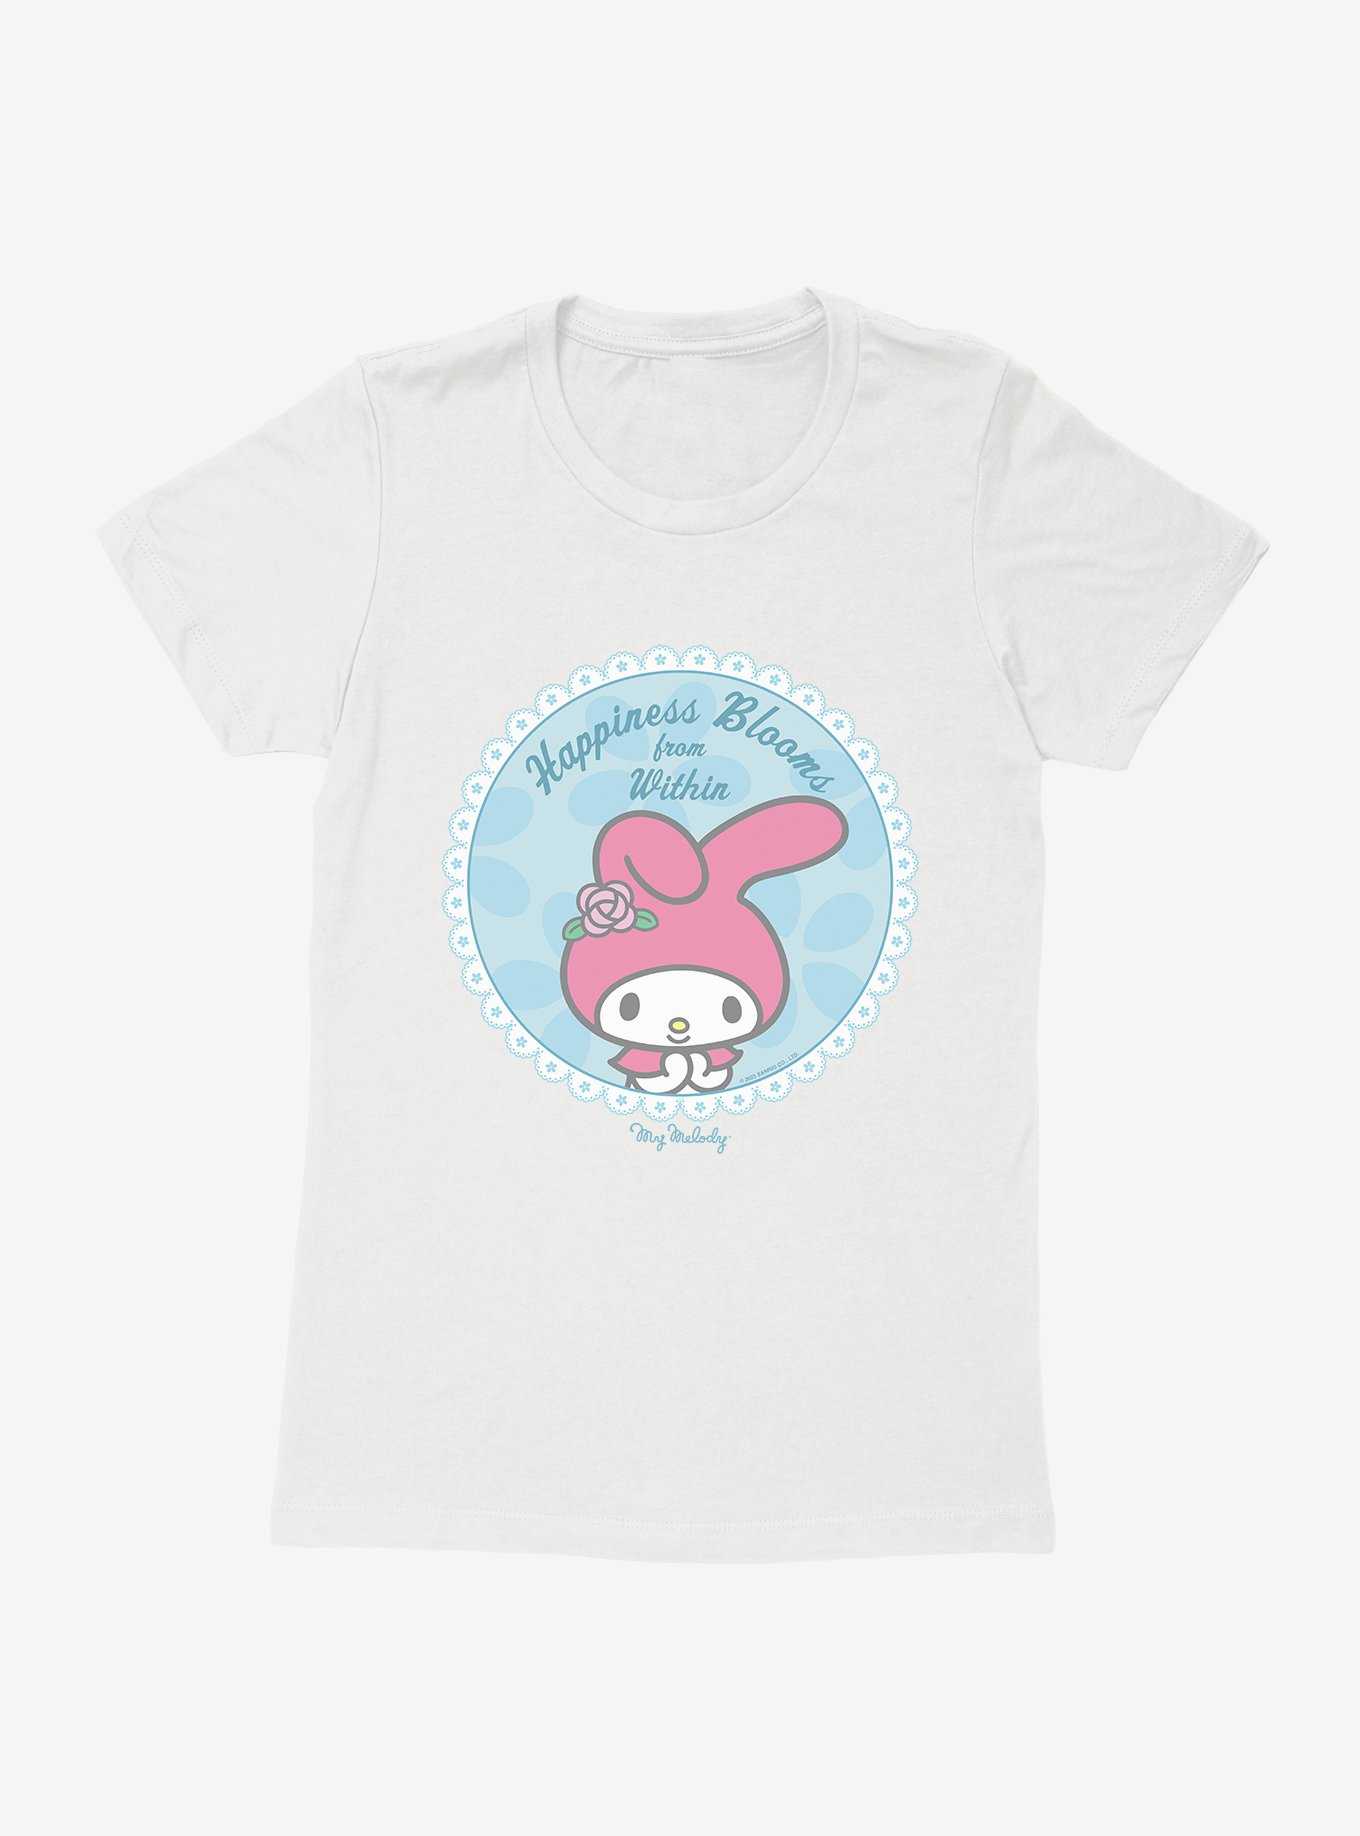 My Melody Happiness Blooms From Within Womens T-Shirt, , hi-res